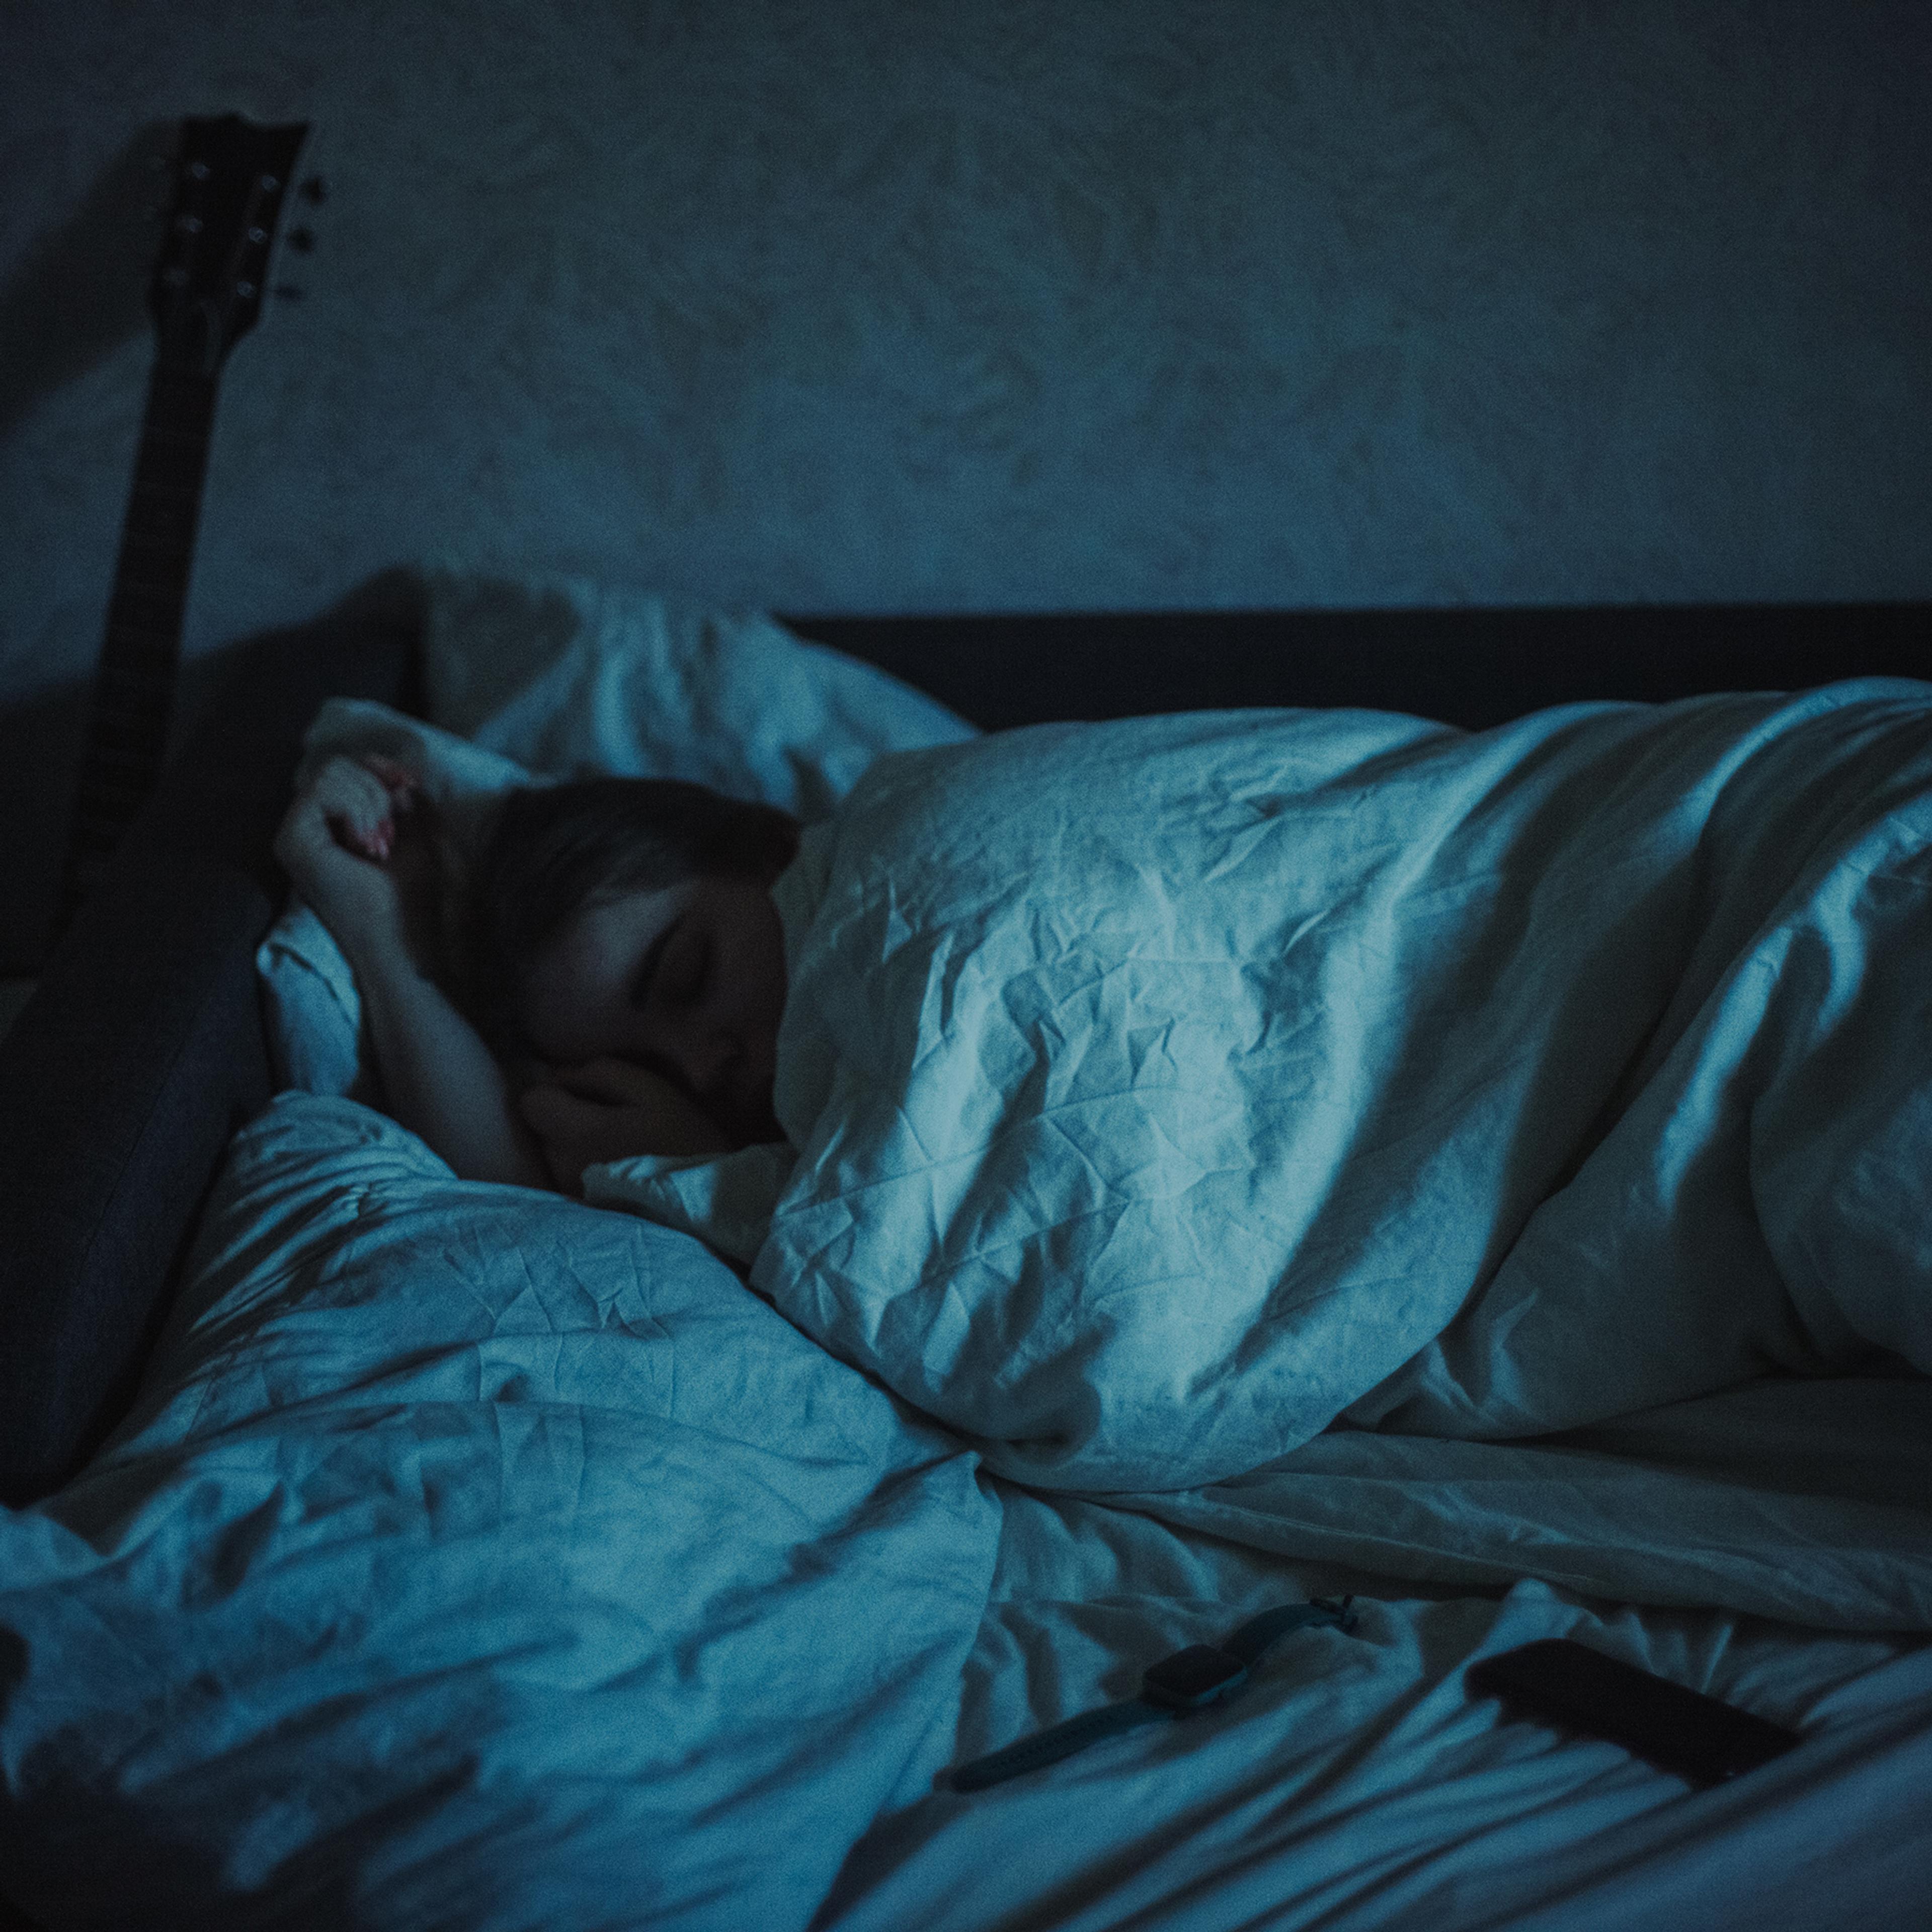 In a dark room a woman is asleep under a duvet and a guitar is leaning against the wall